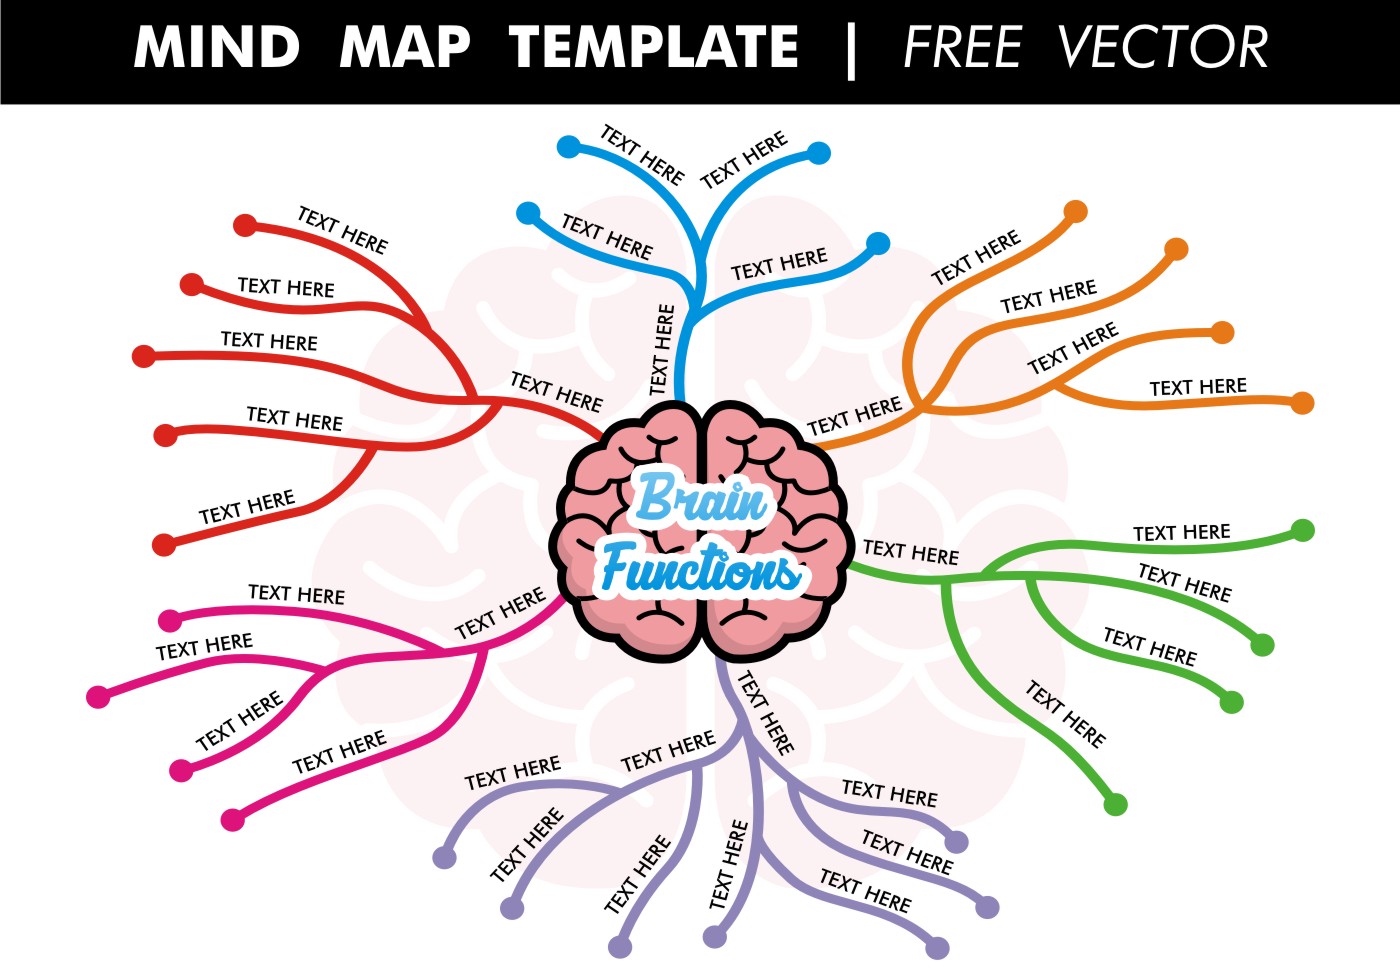 mind-map-template-free-vector-download-free-vector-art-stock